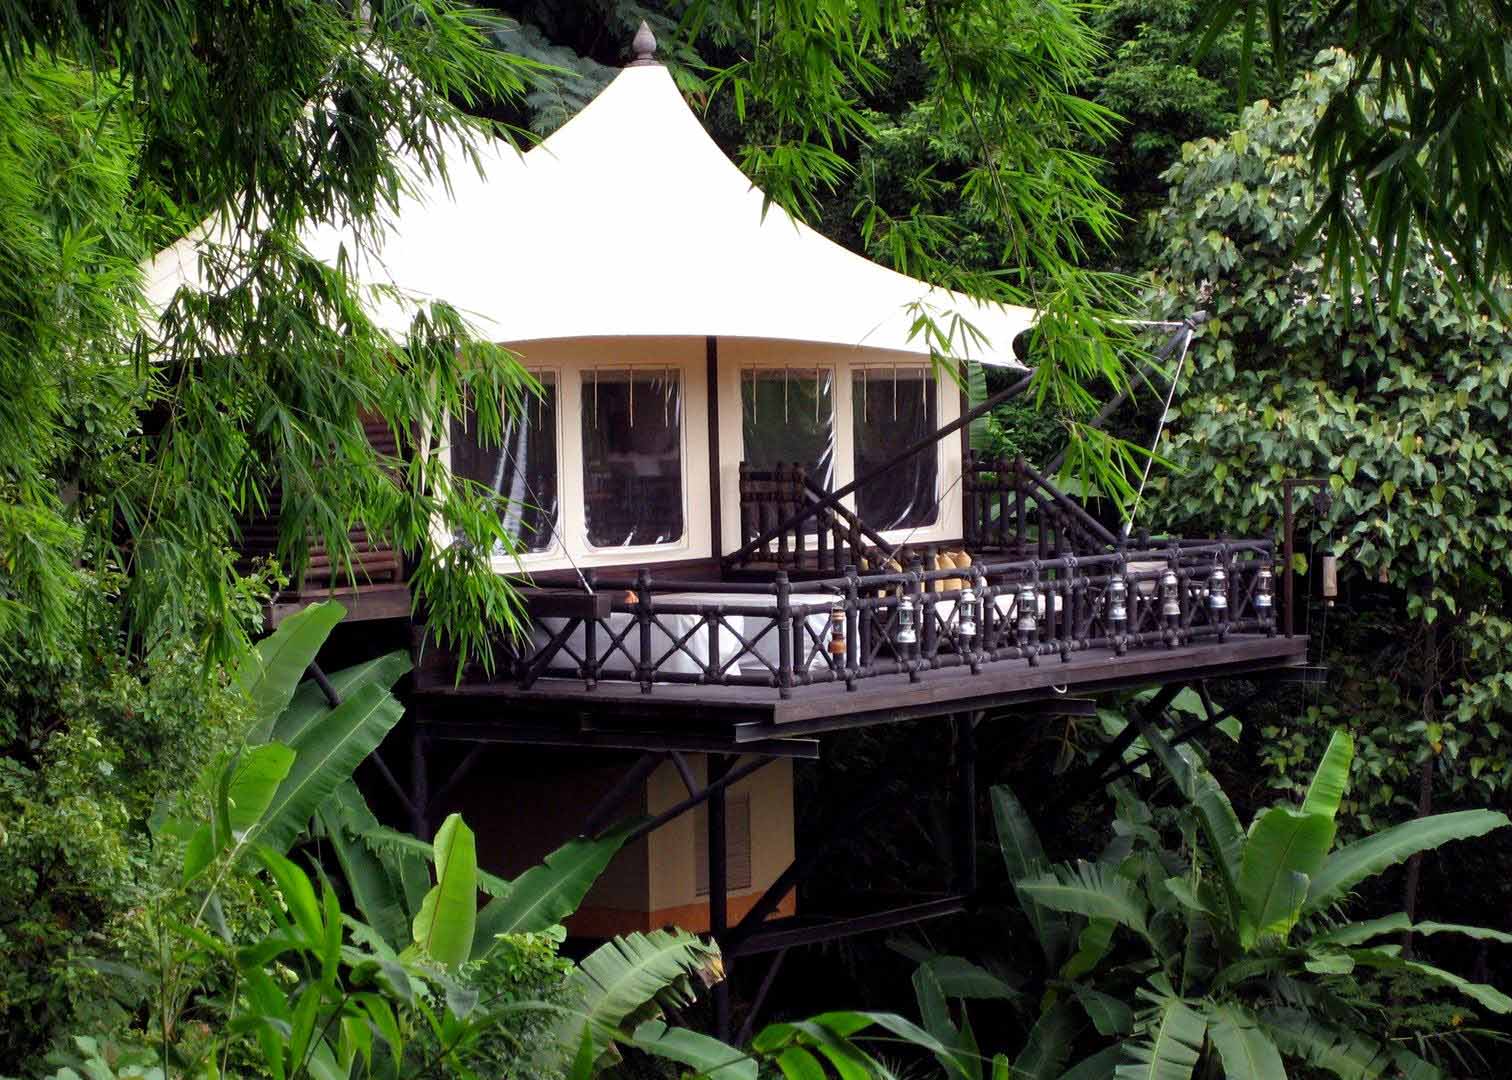 Tent bungalow at Four Season's Tented Camp in the Golden Triangle, Thailand